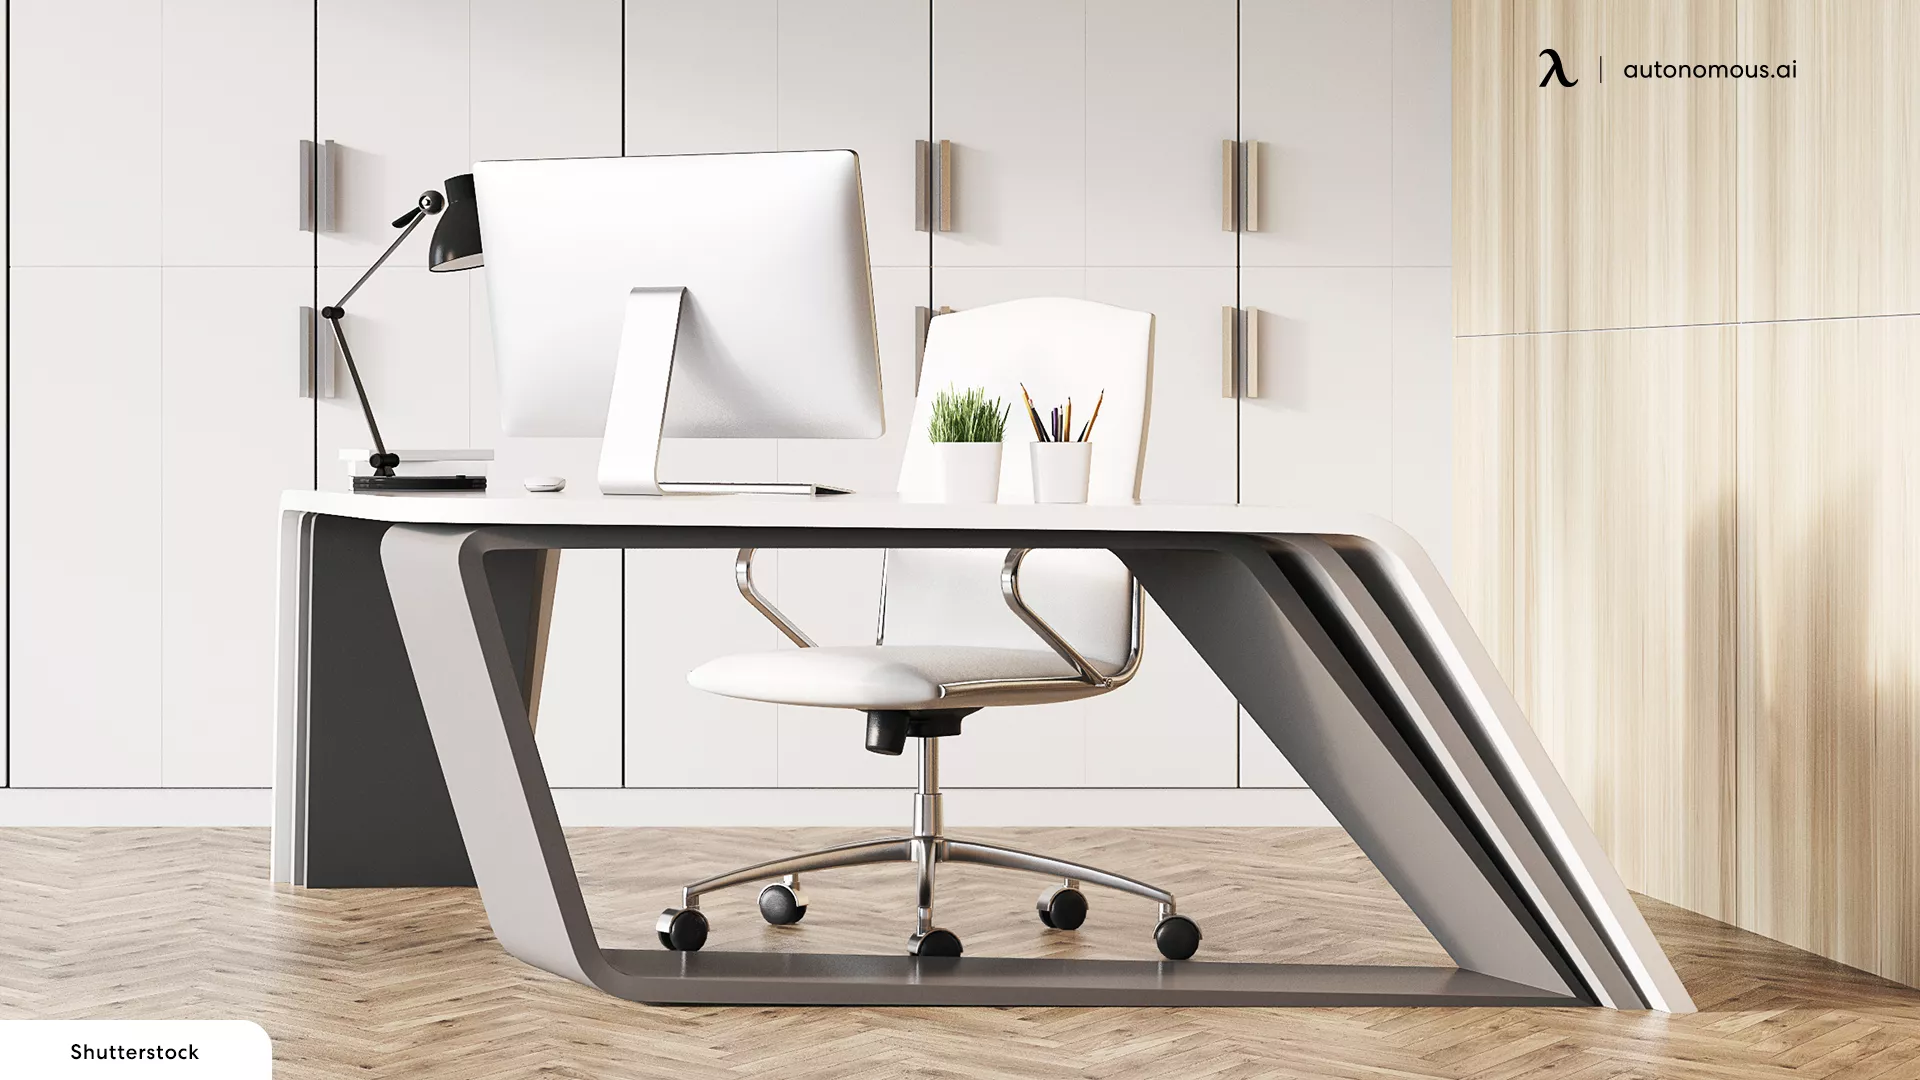 8 Futuristic Office Desk Designs for Your Workspace